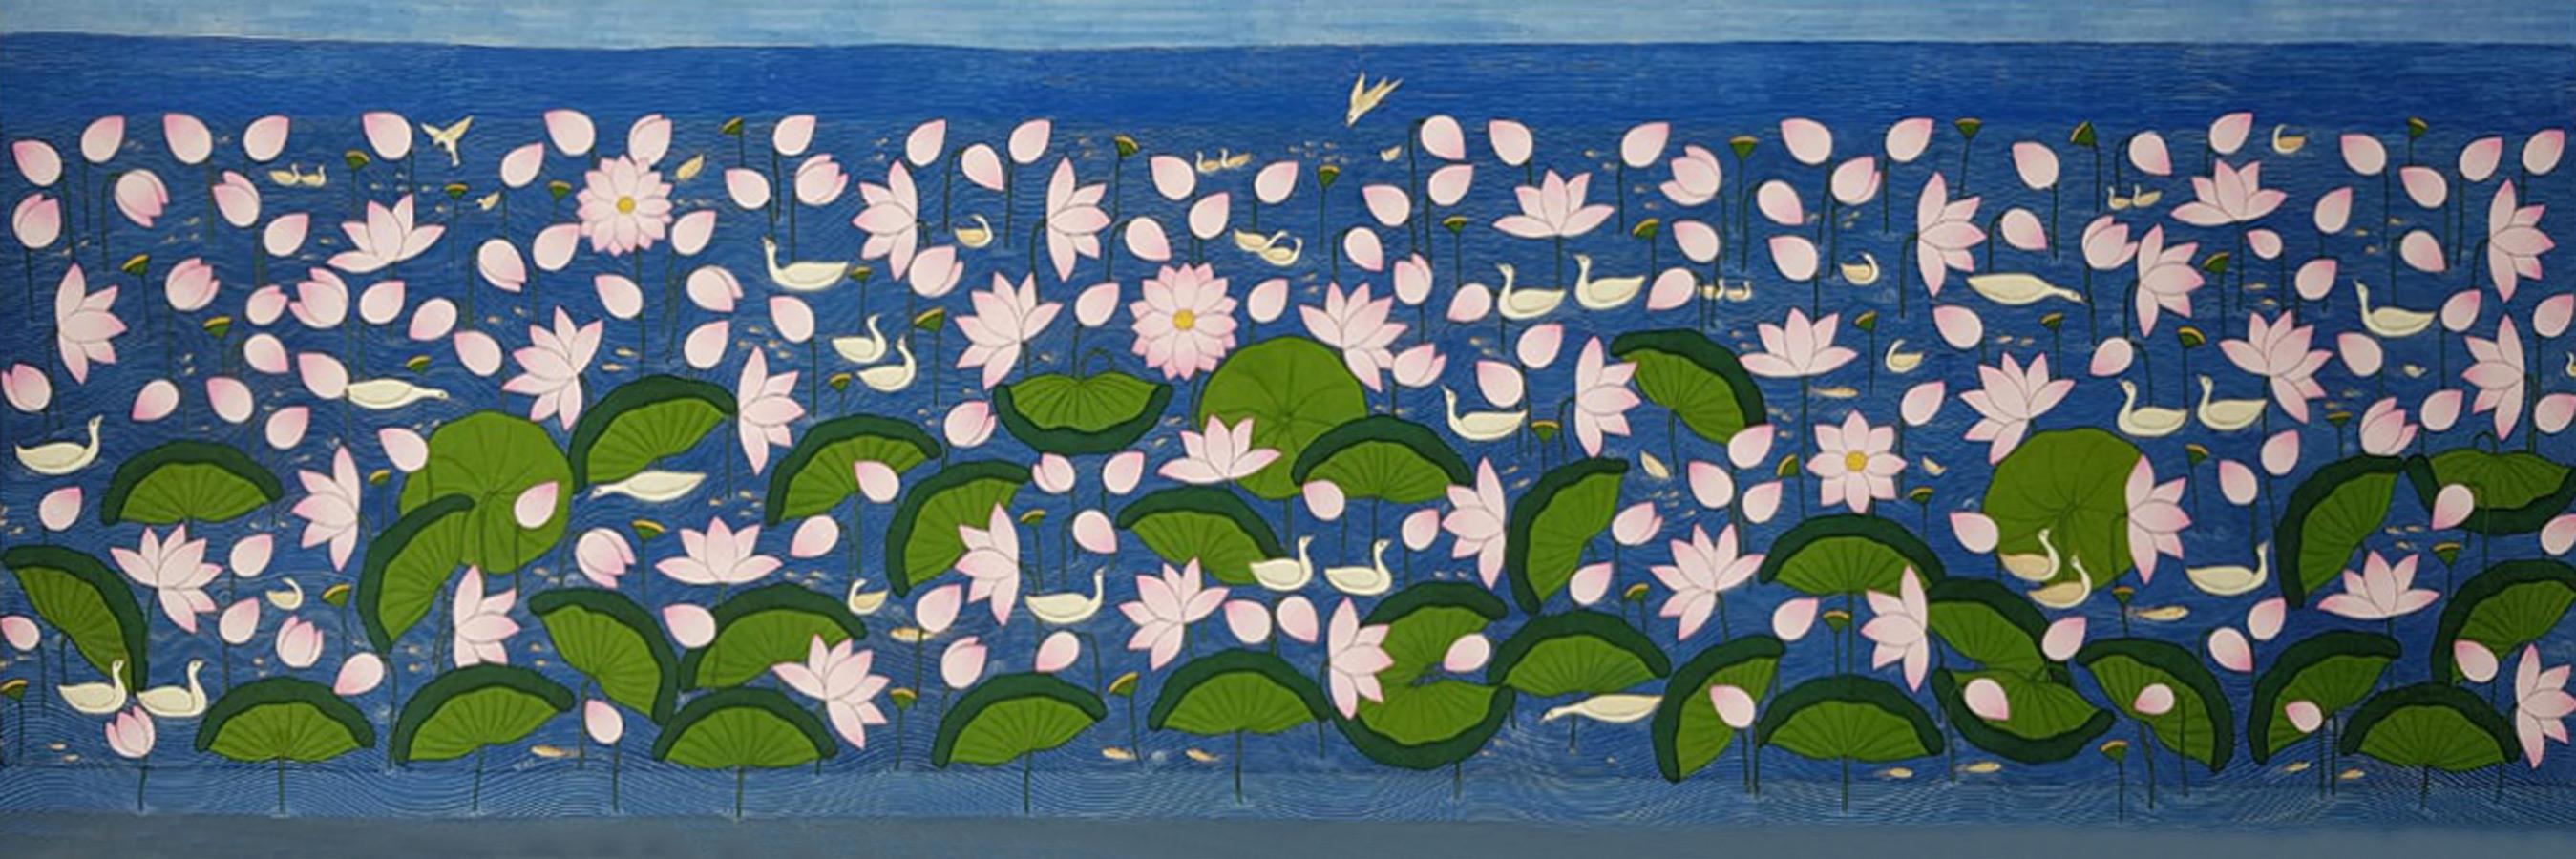 Lotus Pond, Wash on Cloth, Pink, Blue, Green by Indian Artist "In Stock"